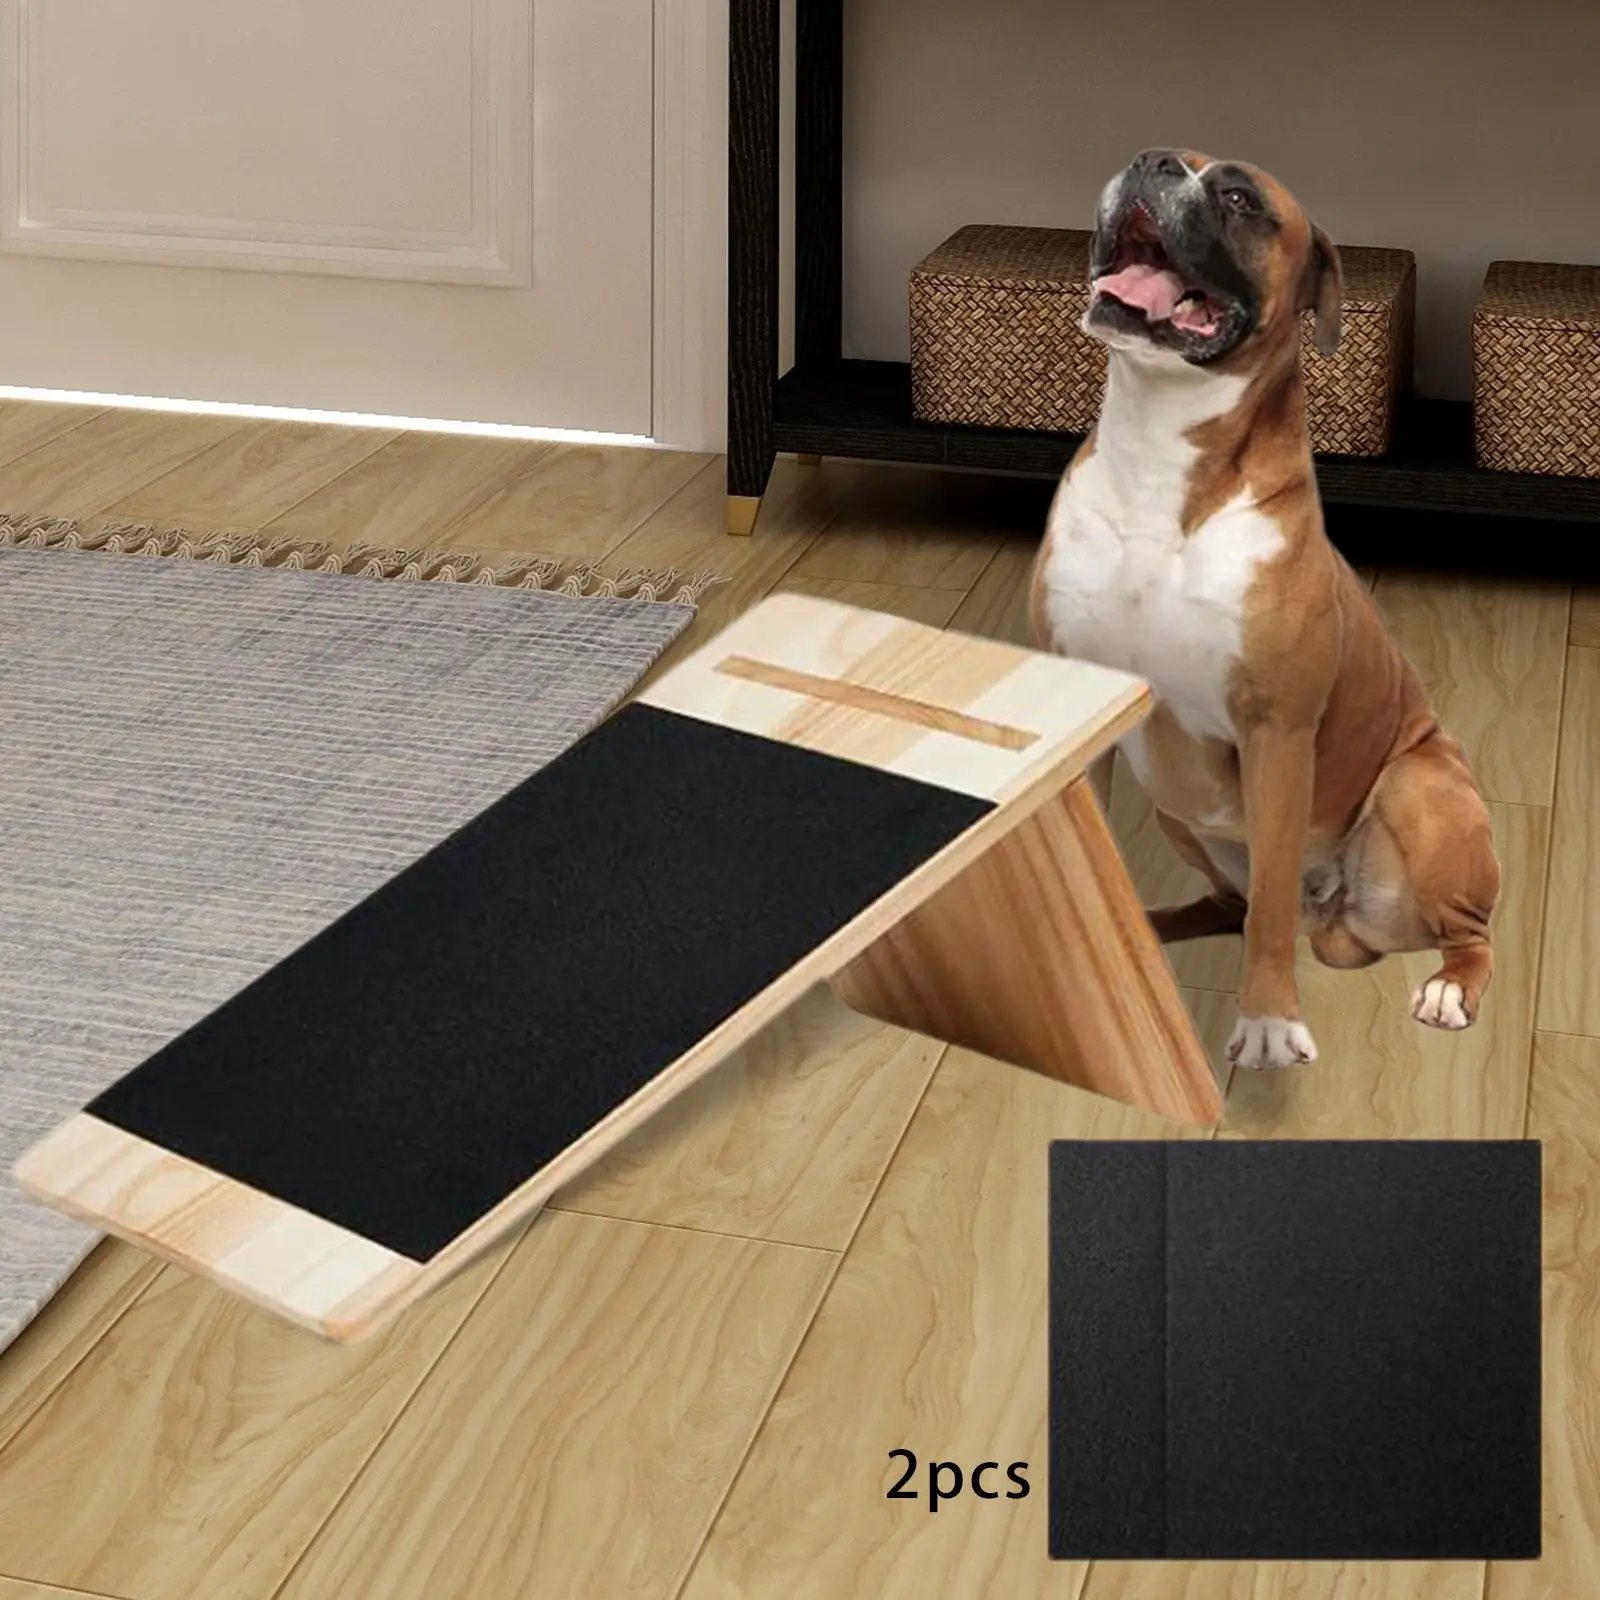 Dog Scratch Pad for Nails Toy Furniture Protection for Medium and Large Dogs